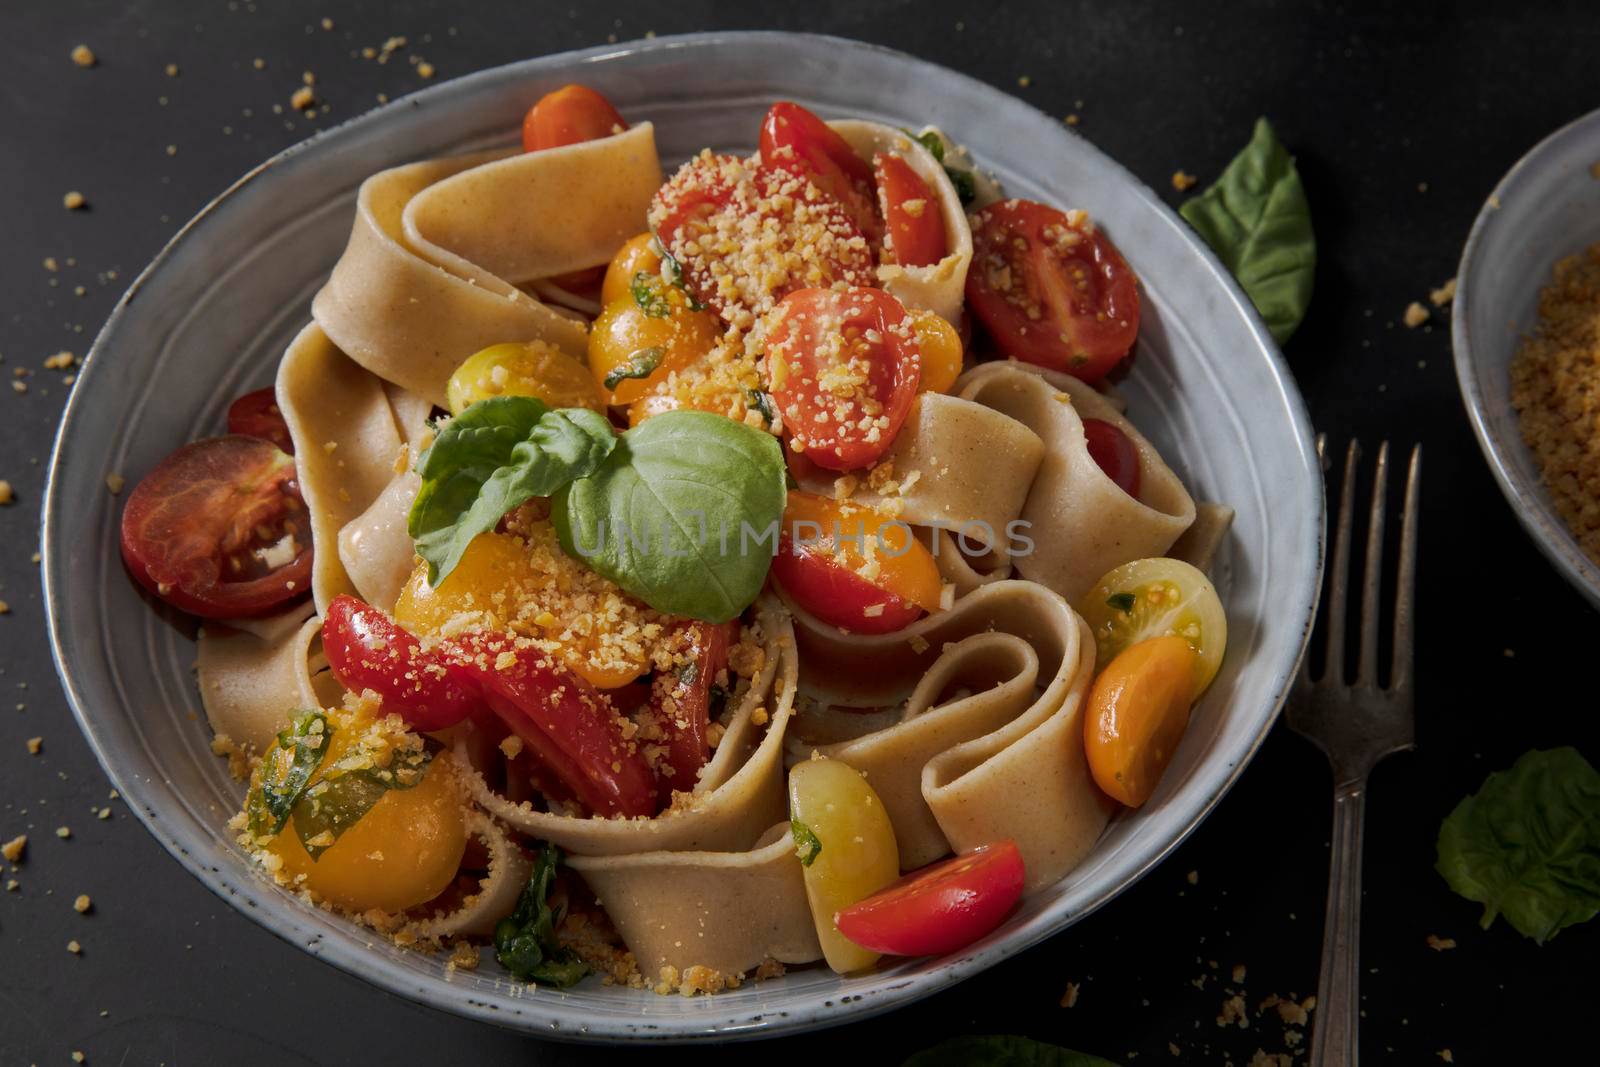 Healthy whole wheat pappardelle pasta with fresh tomatoes and basil, and a vegan nut based topping.